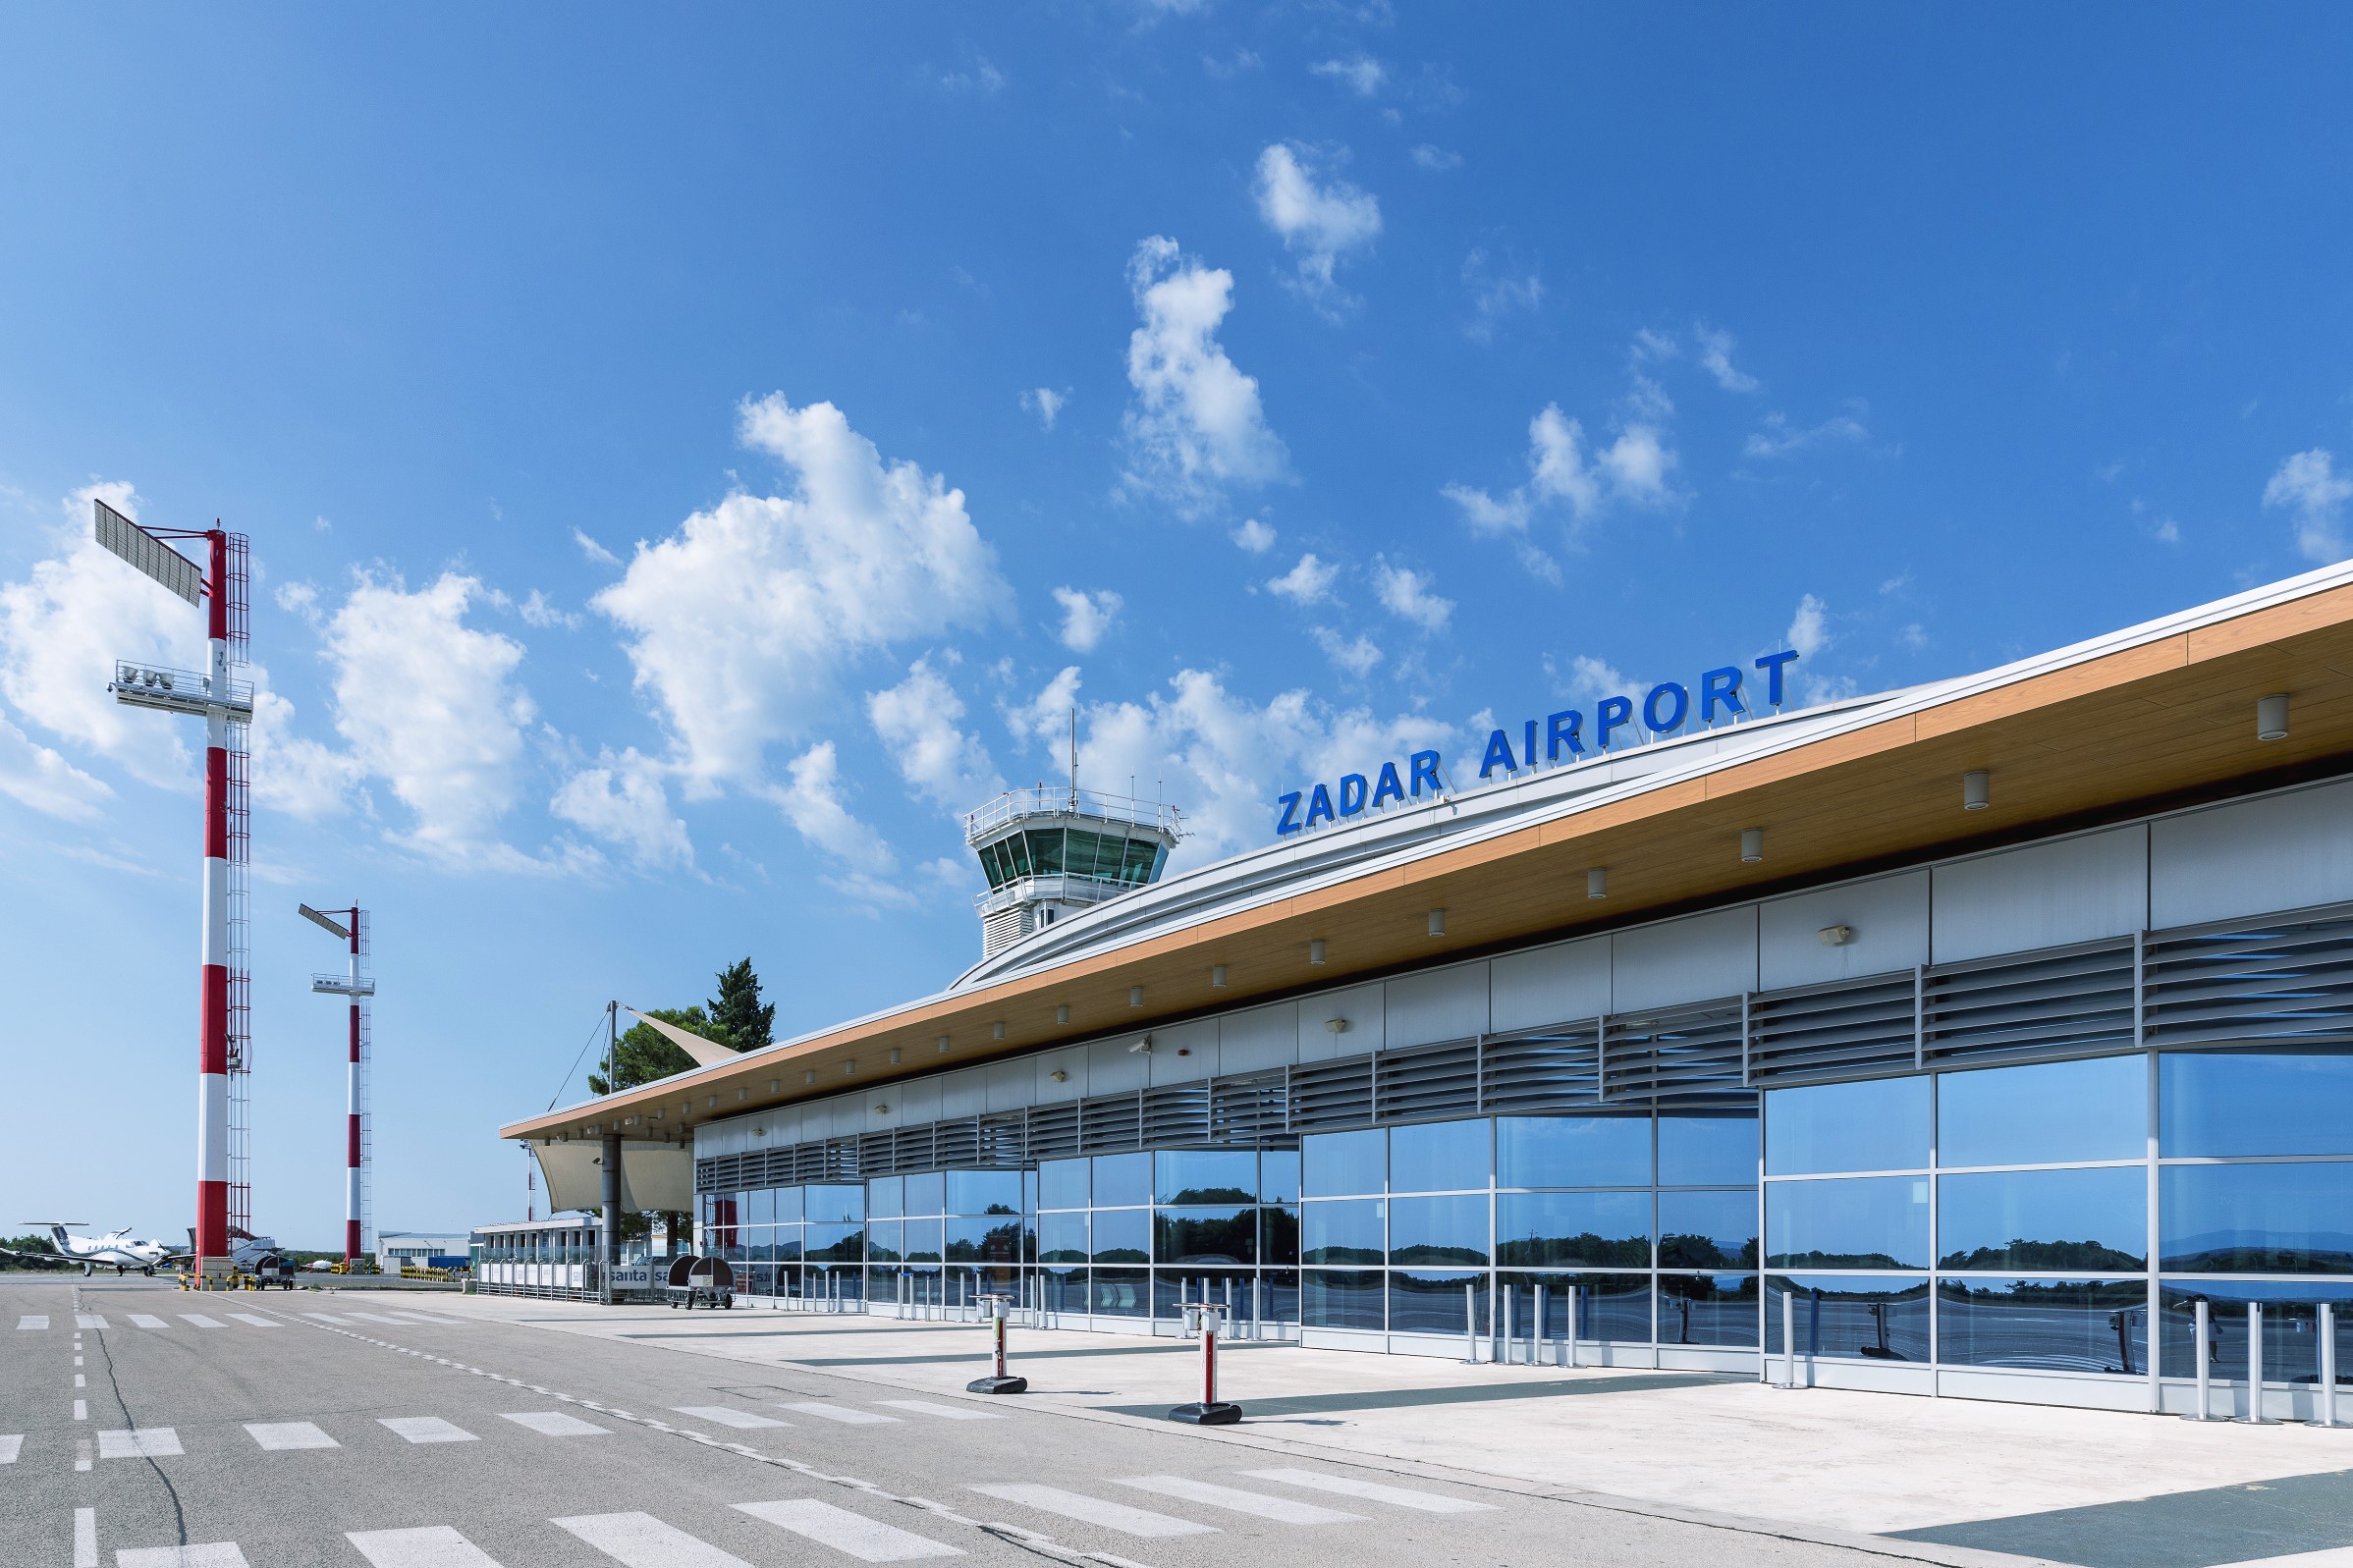 Zadar-Airport-Editorial-Use-Only